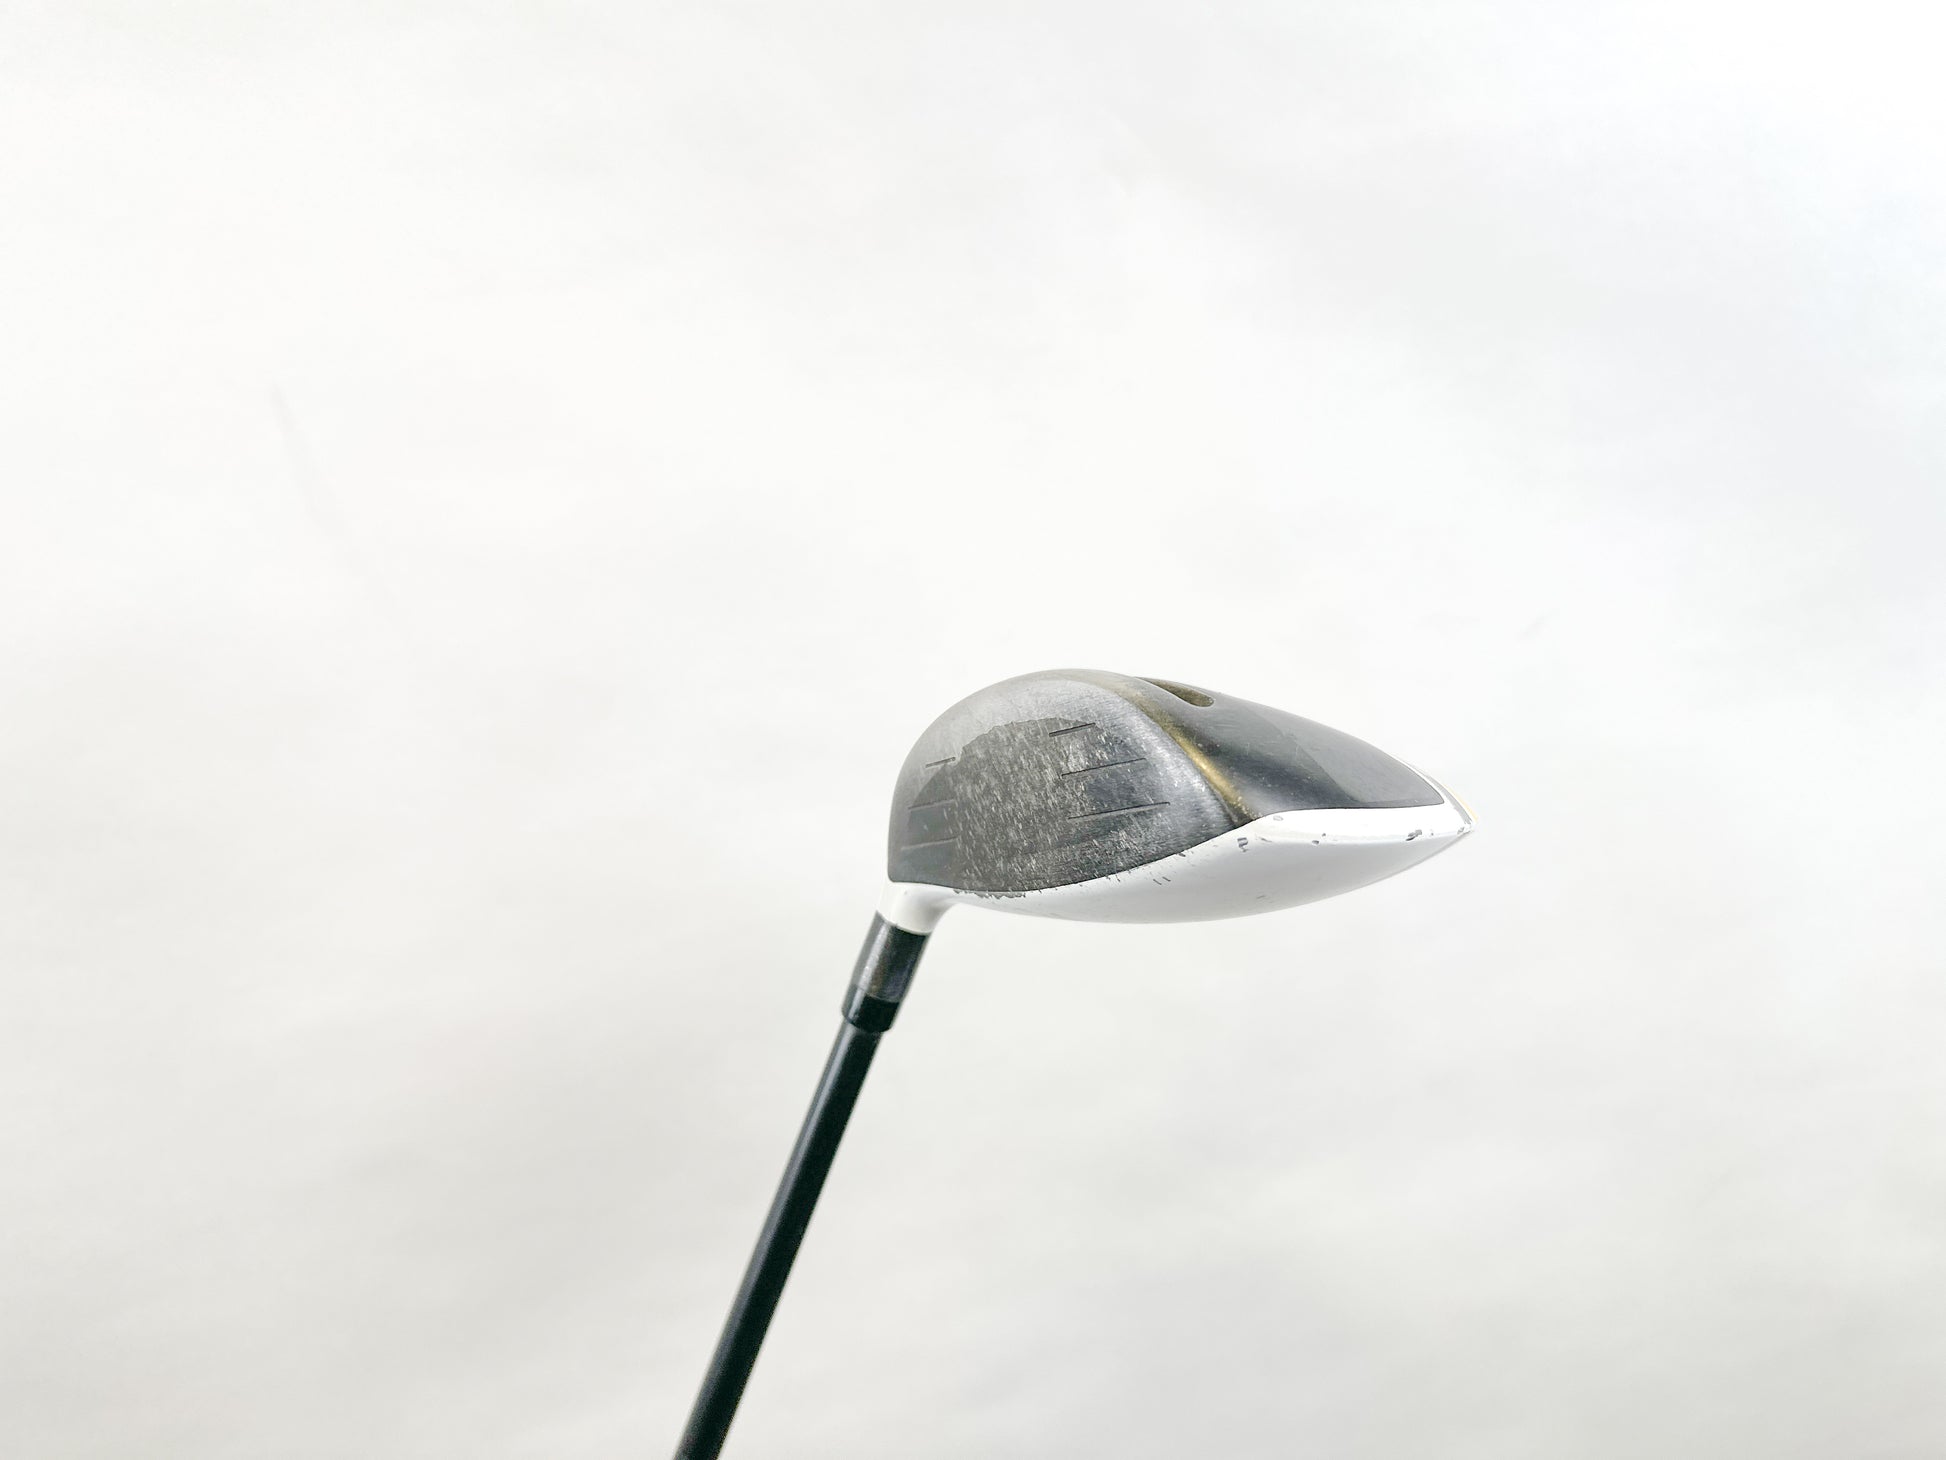 Used TaylorMade RocketBallz RBZ Stage 2 3-Wood - Right-Handed - 17 Degrees - Seniors Flex-Next Round